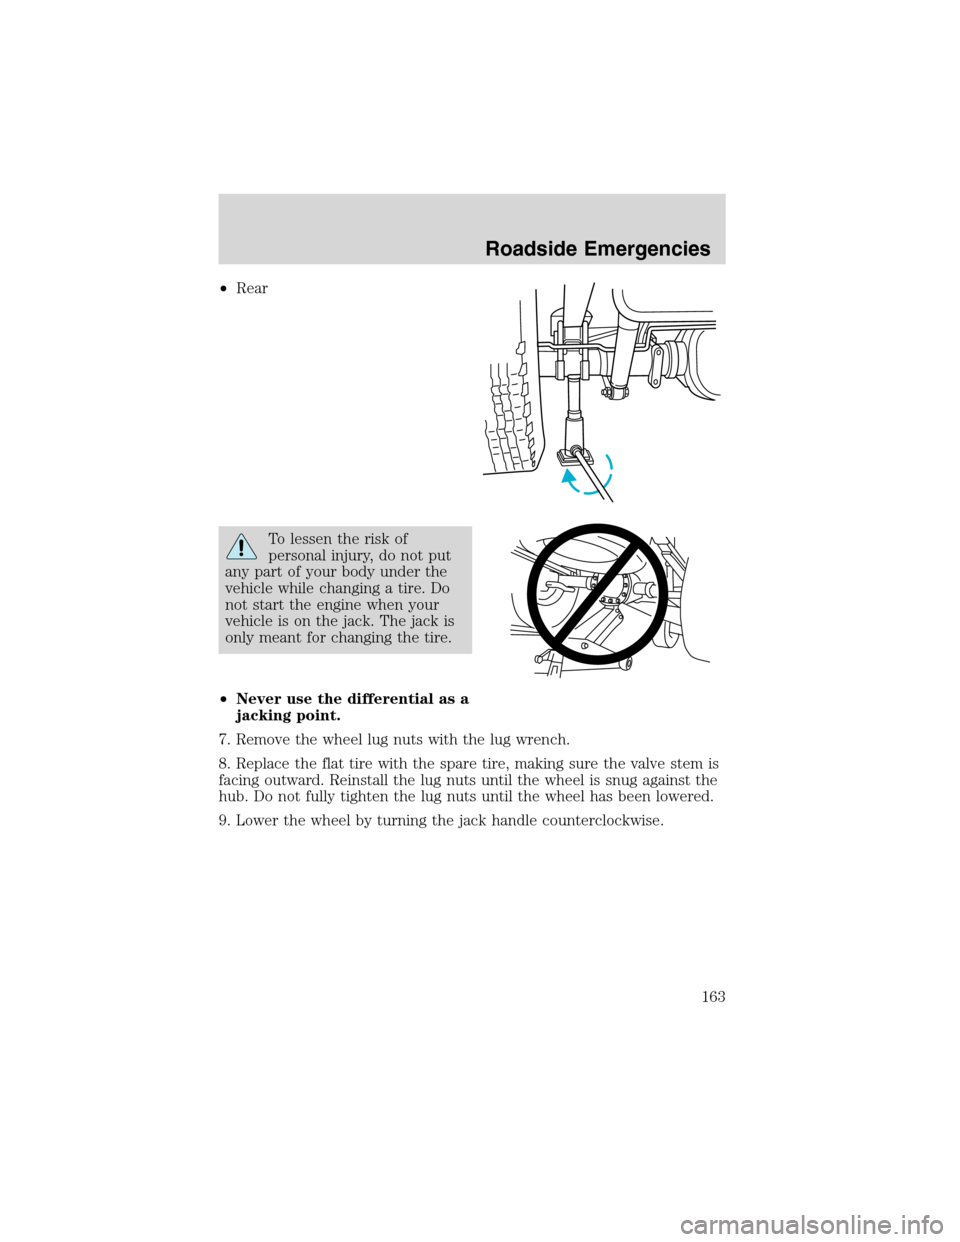 FORD RANGER 2003 2.G Service Manual •Rear
To lessen the risk of
personal injury, do not put
any part of your body under the
vehicle while changing a tire. Do
not start the engine when your
vehicle is on the jack. The jack is
only mean